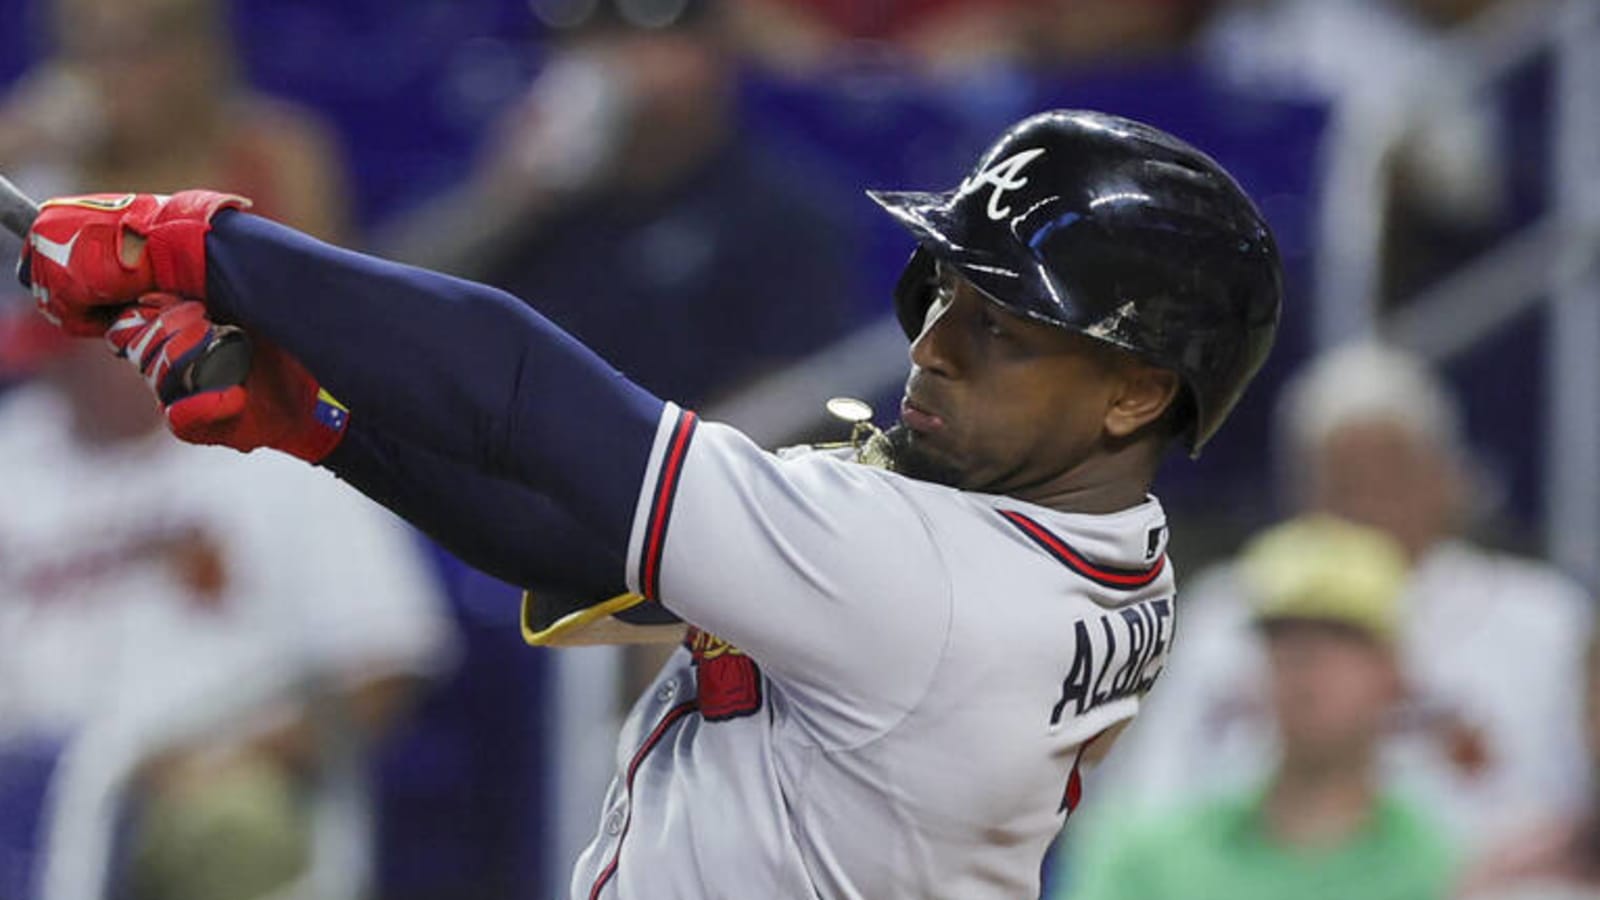 Braves are approaching an incredible home run record